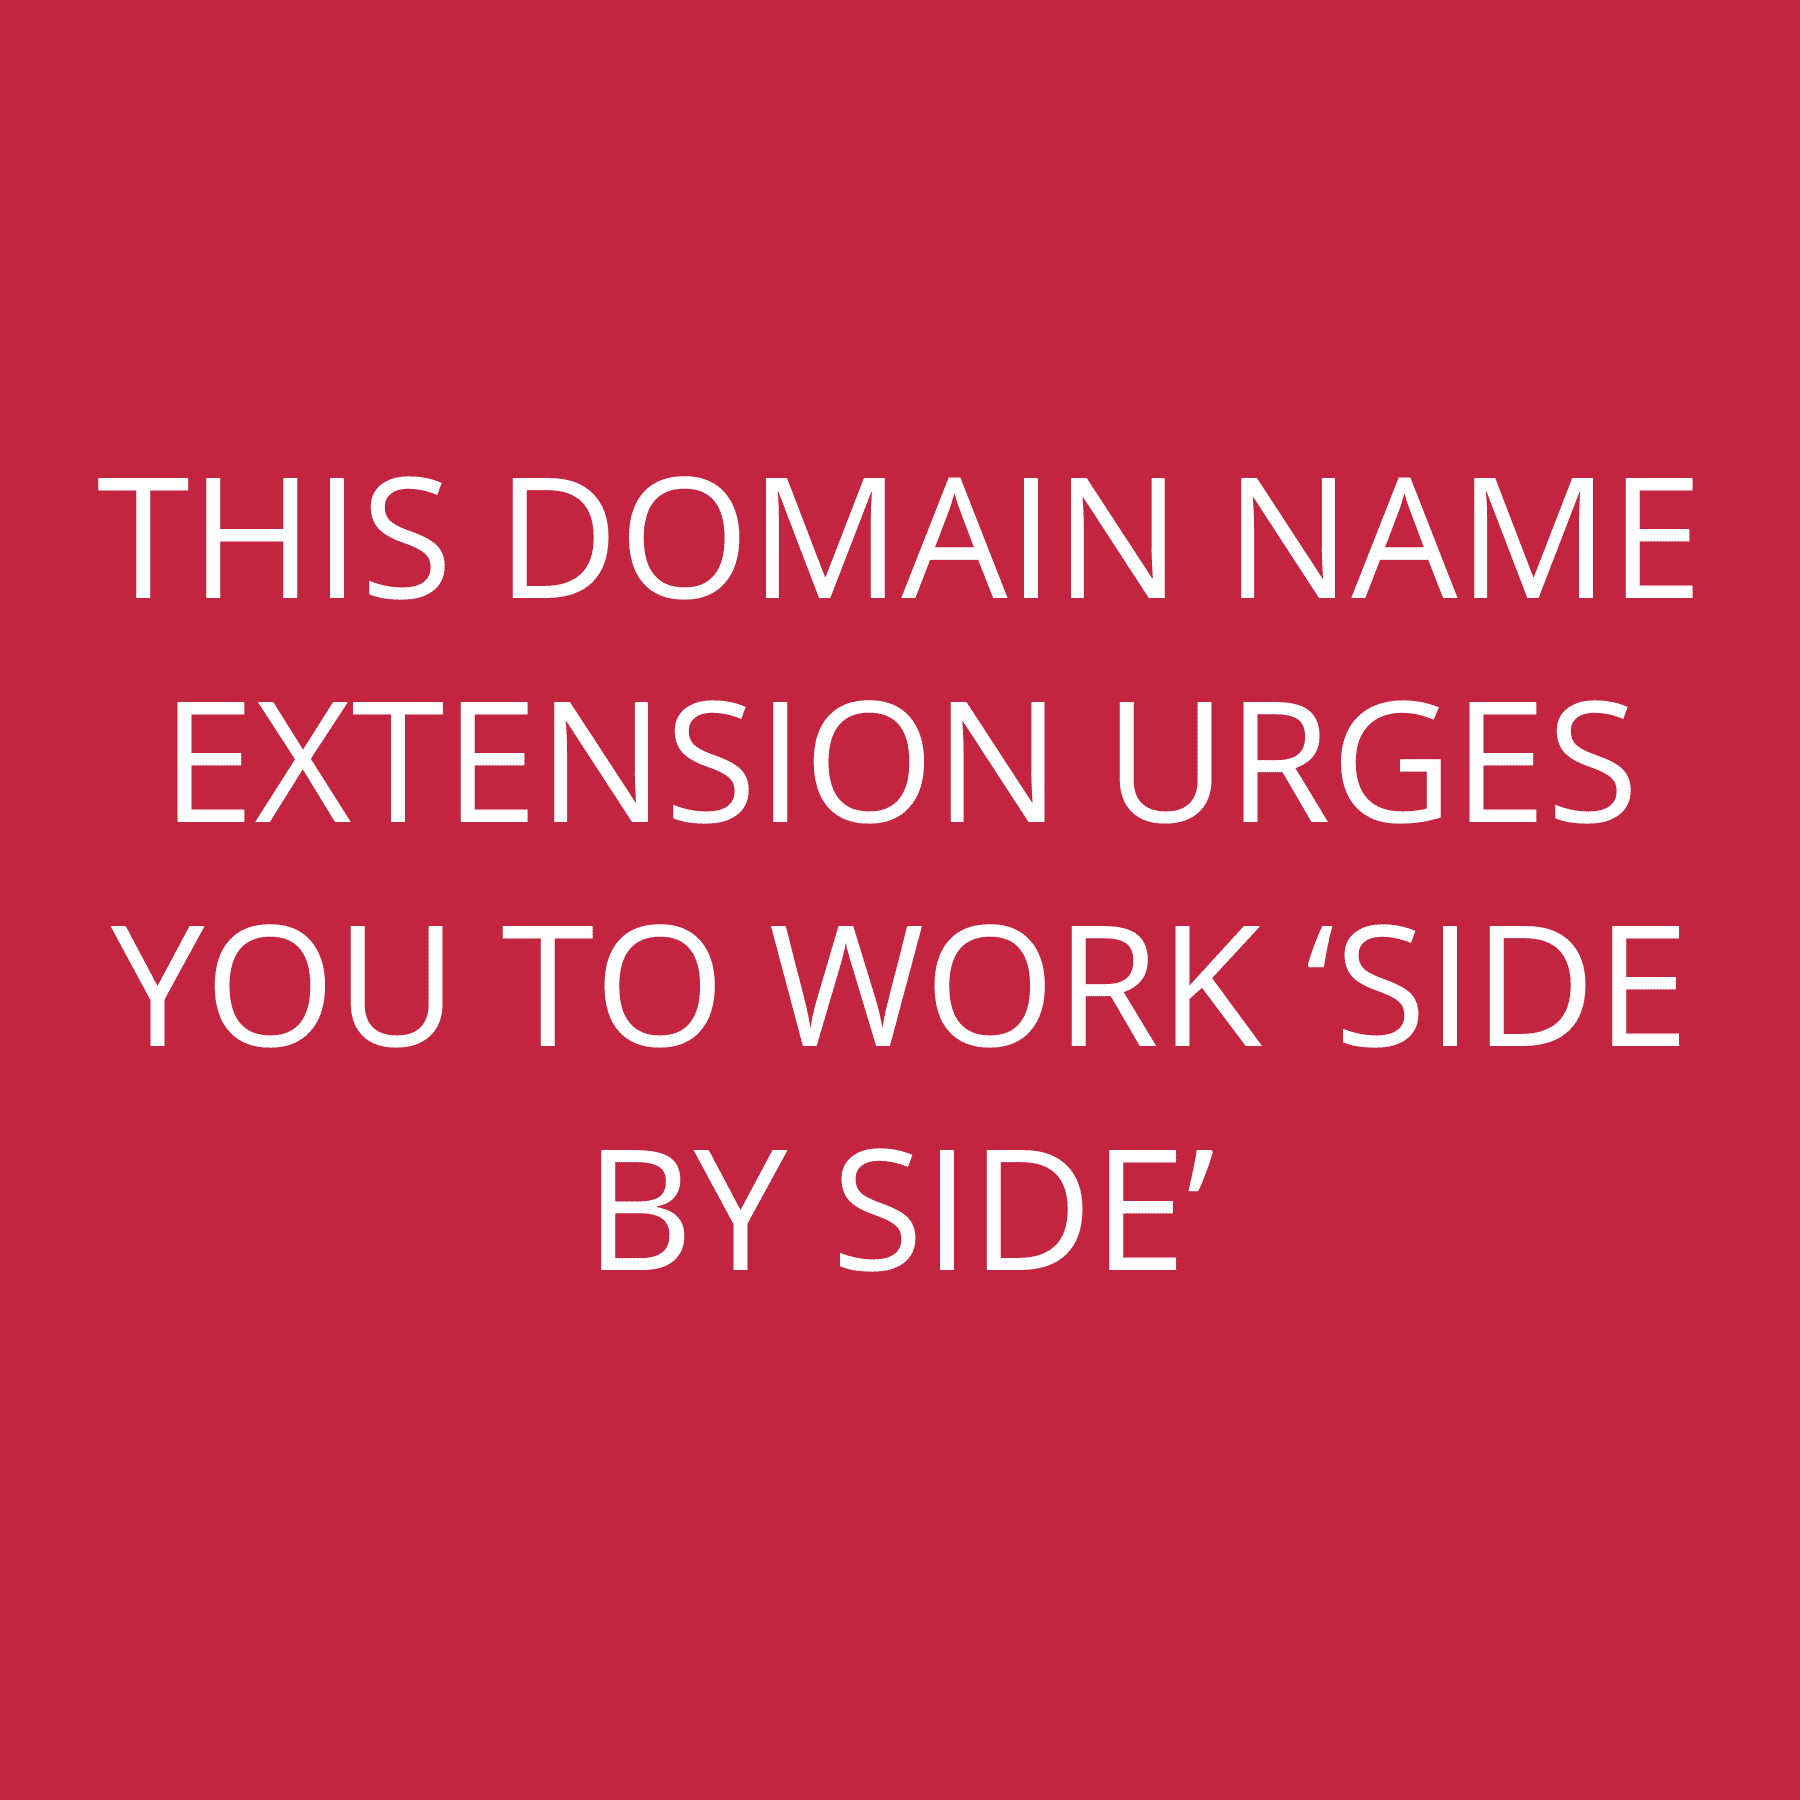 This domain name extension urges you to work ‘Side by Side’